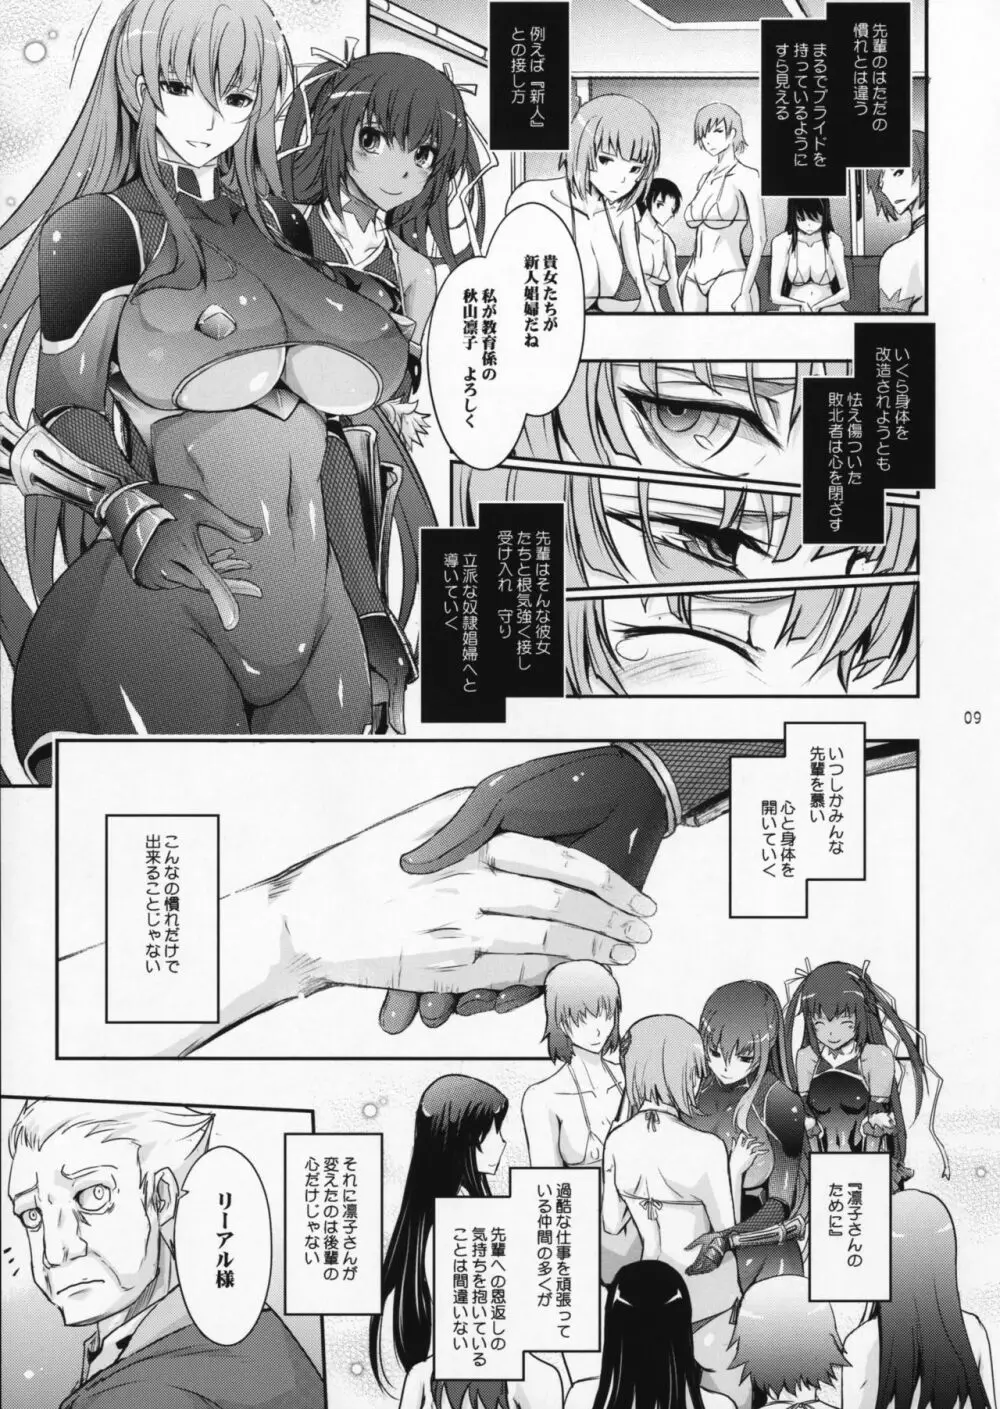 TENTACLES 隷嬢秋山凛子の蜜箱 Page.8